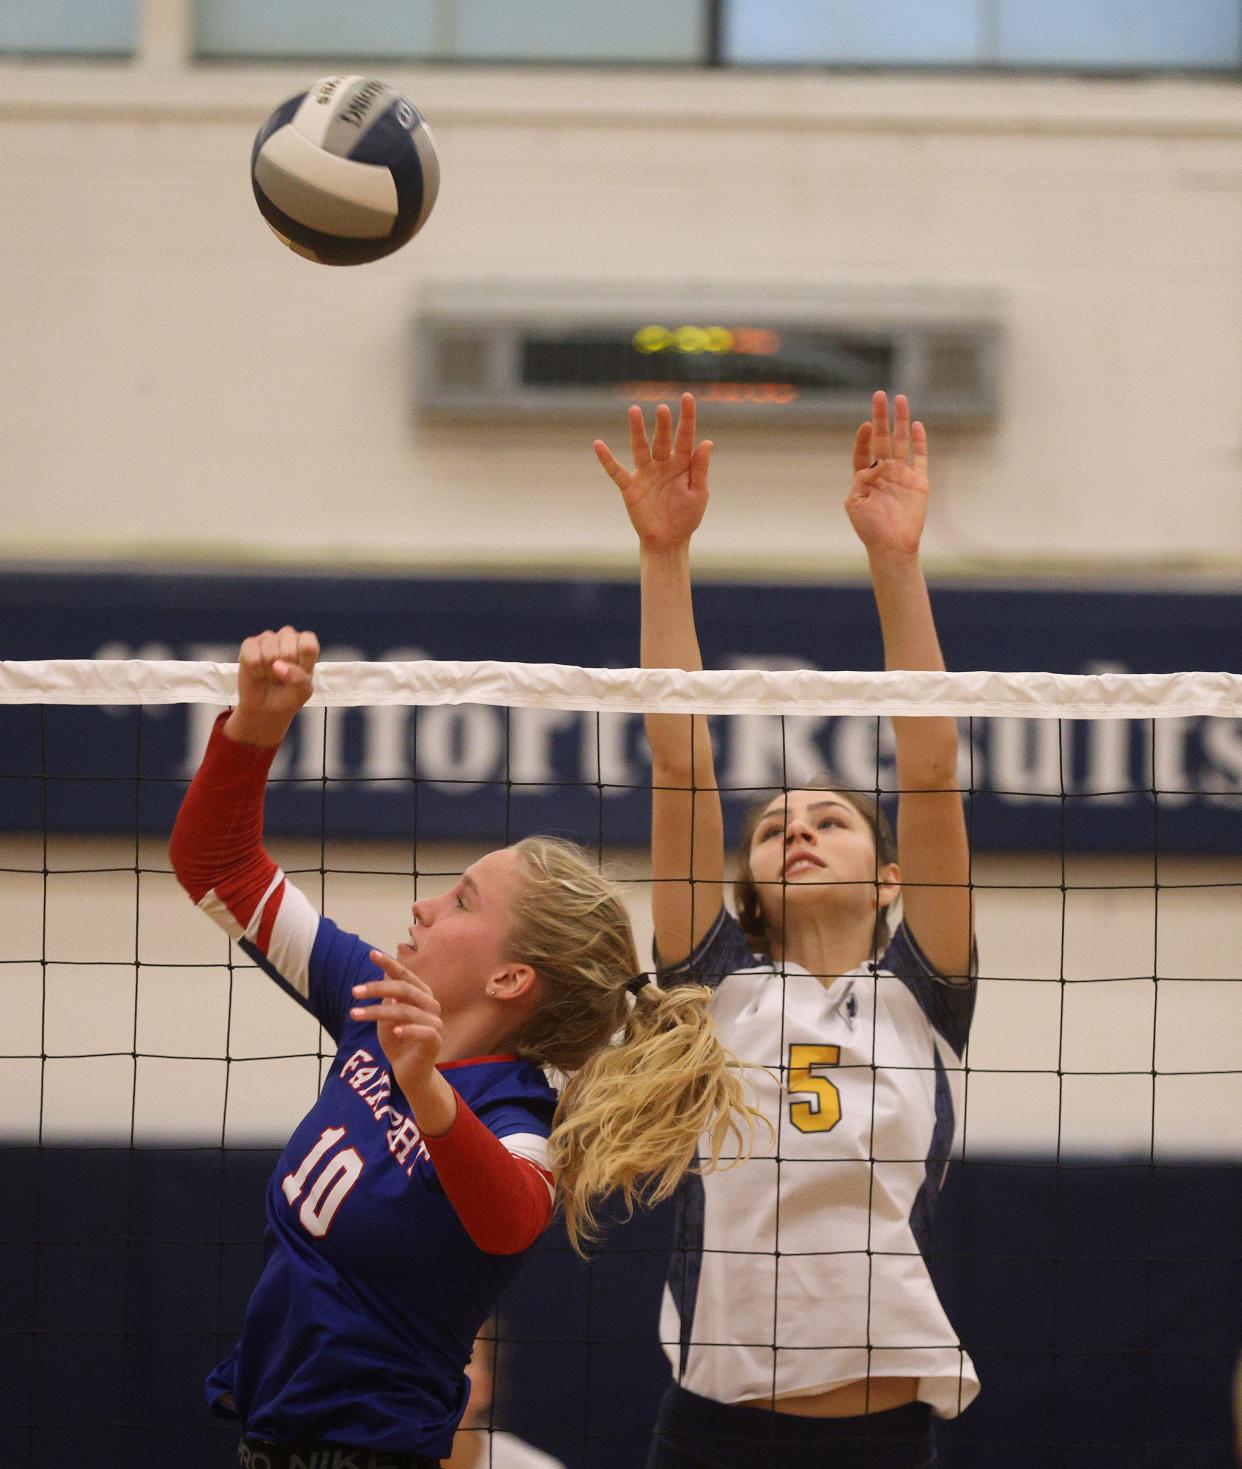 Fairport's Lana Wood and Thomas's Christina Newman pay the ball at the net.